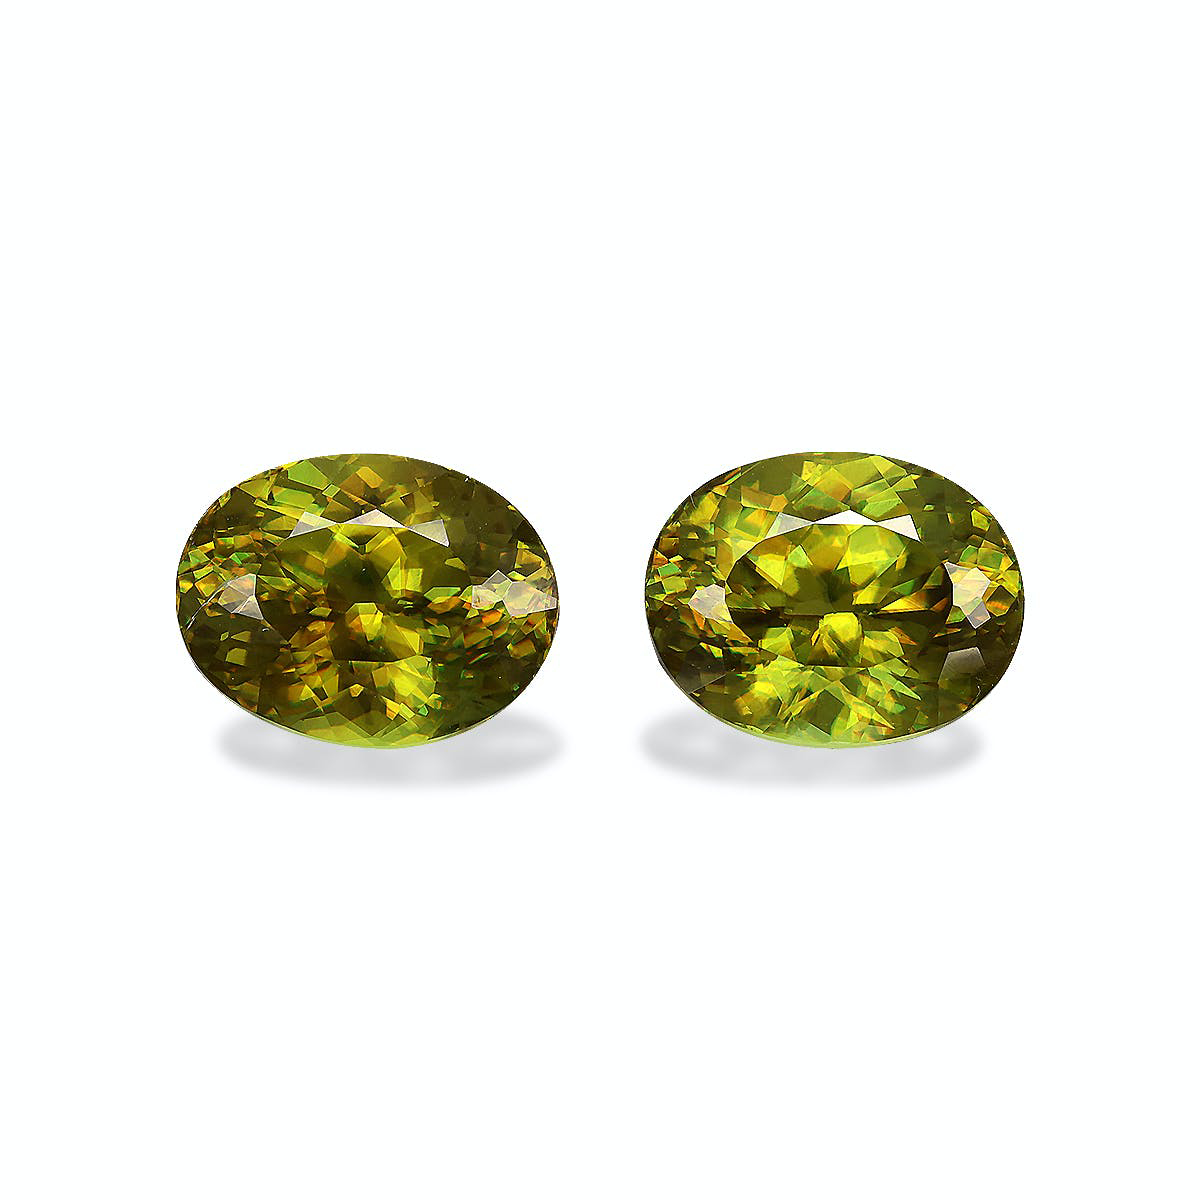 Picture of Lime Green Sphene 13.57ct - Pair (SH1064)